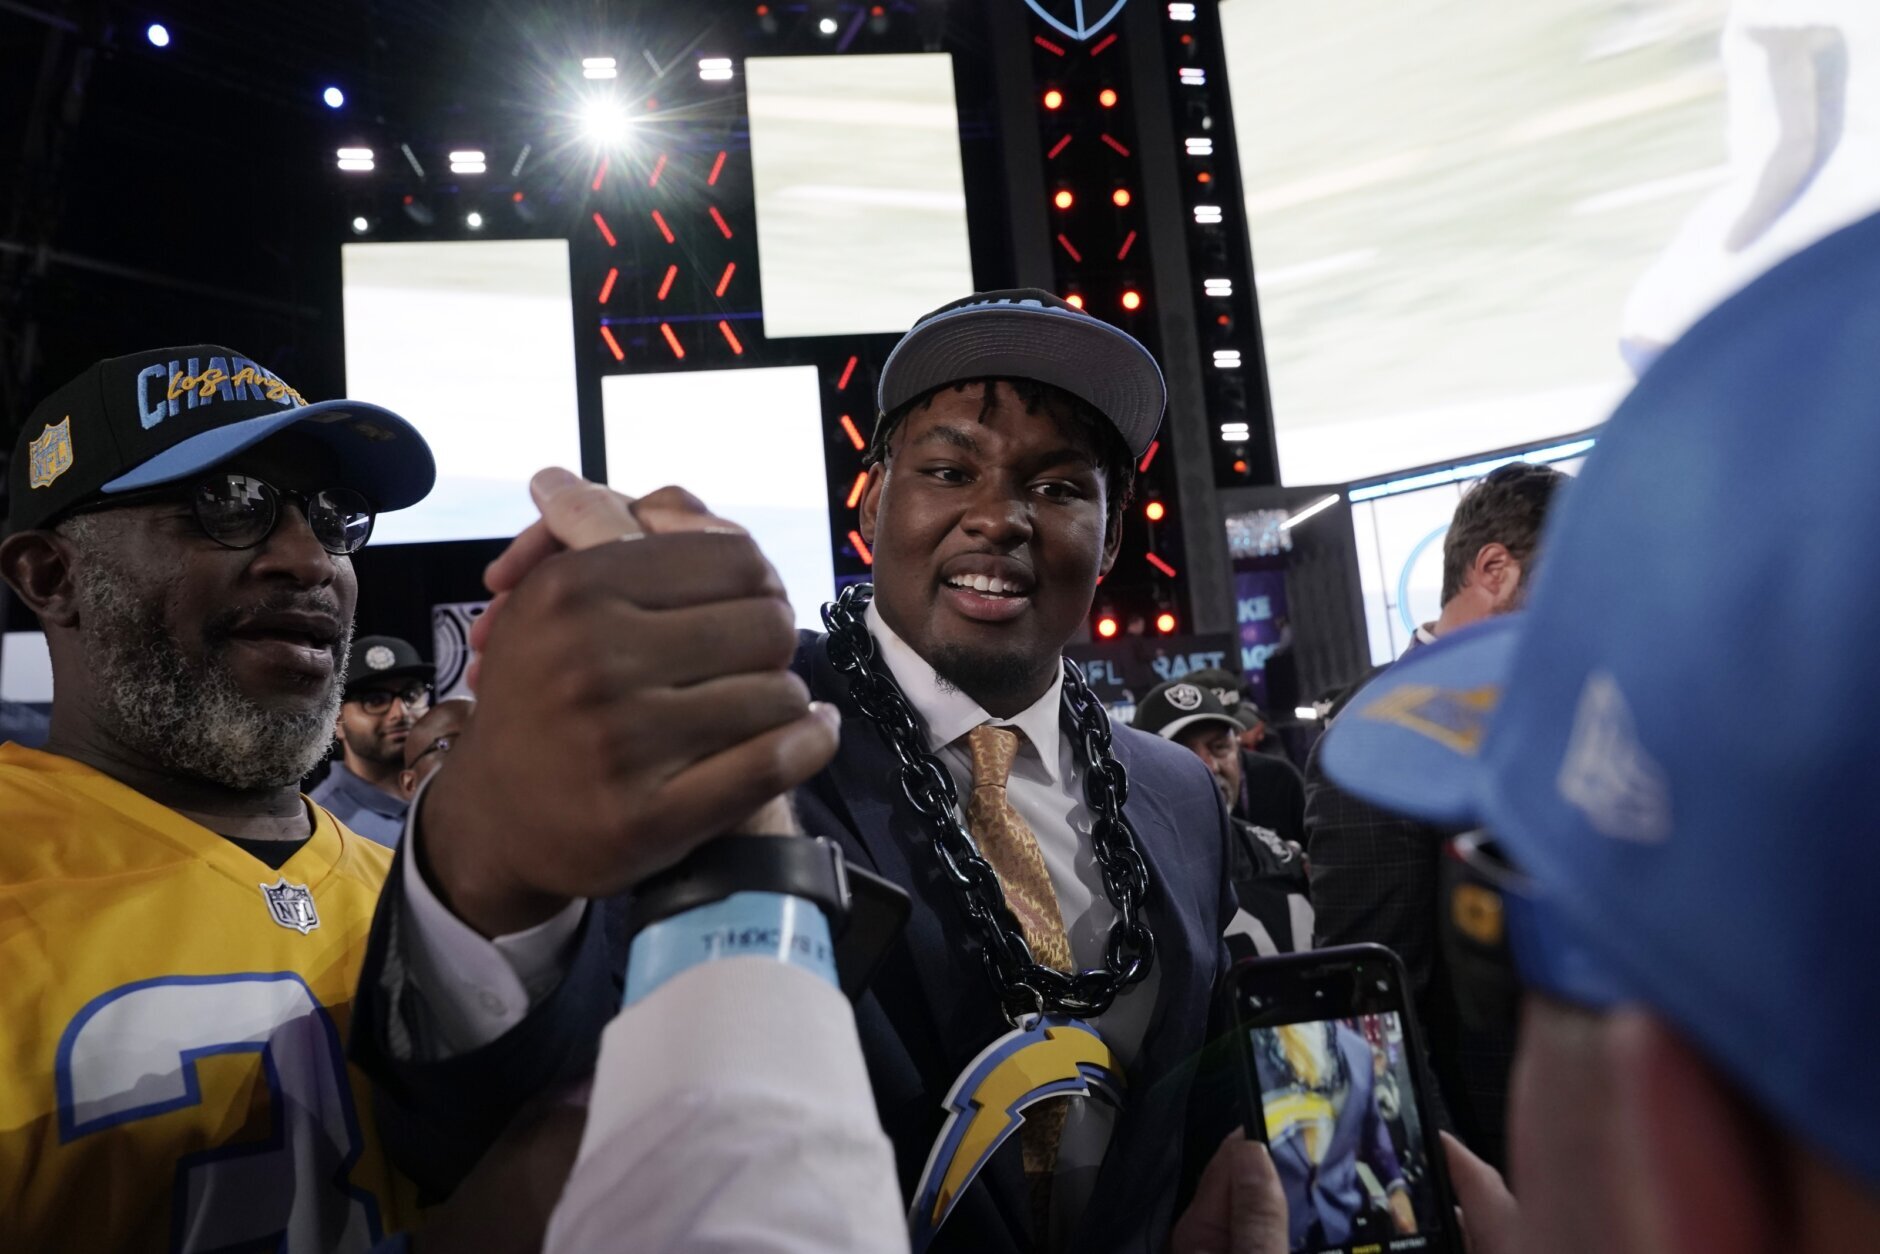 Boston College offensive lineman Zion Johnson shakes hands with fans after being chosen by the Los Angeles Chargers with the 17th pick of the NFL football draft Thursday, April 28, 2022, in Las Vegas. (AP Photo/Jae C. Hong)